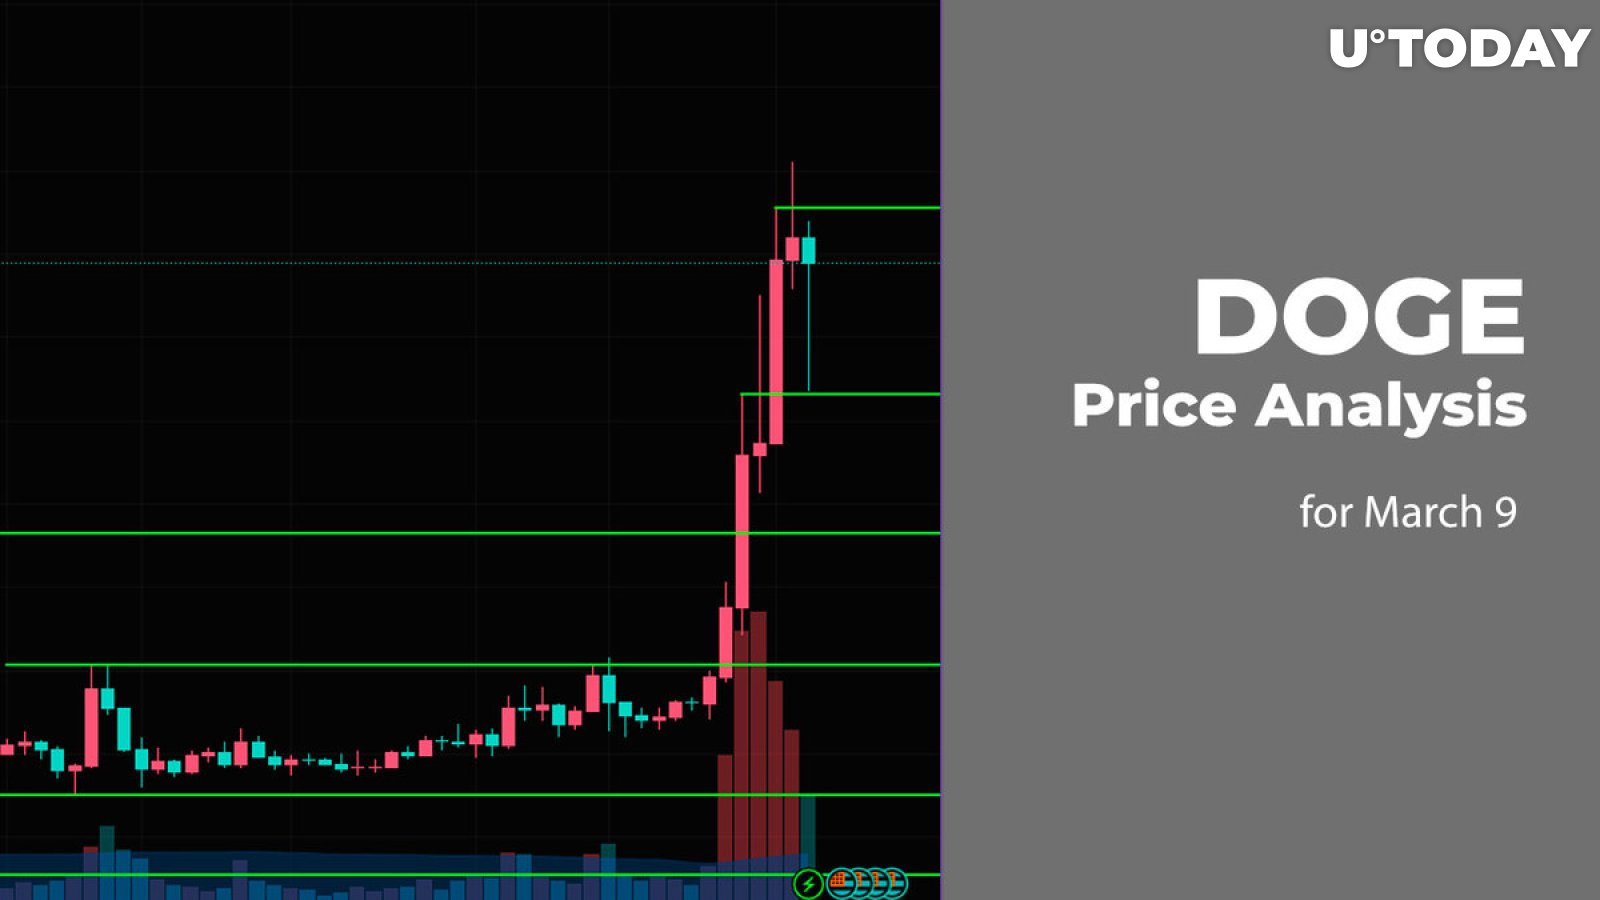 DOGE Price Prediction for March 9